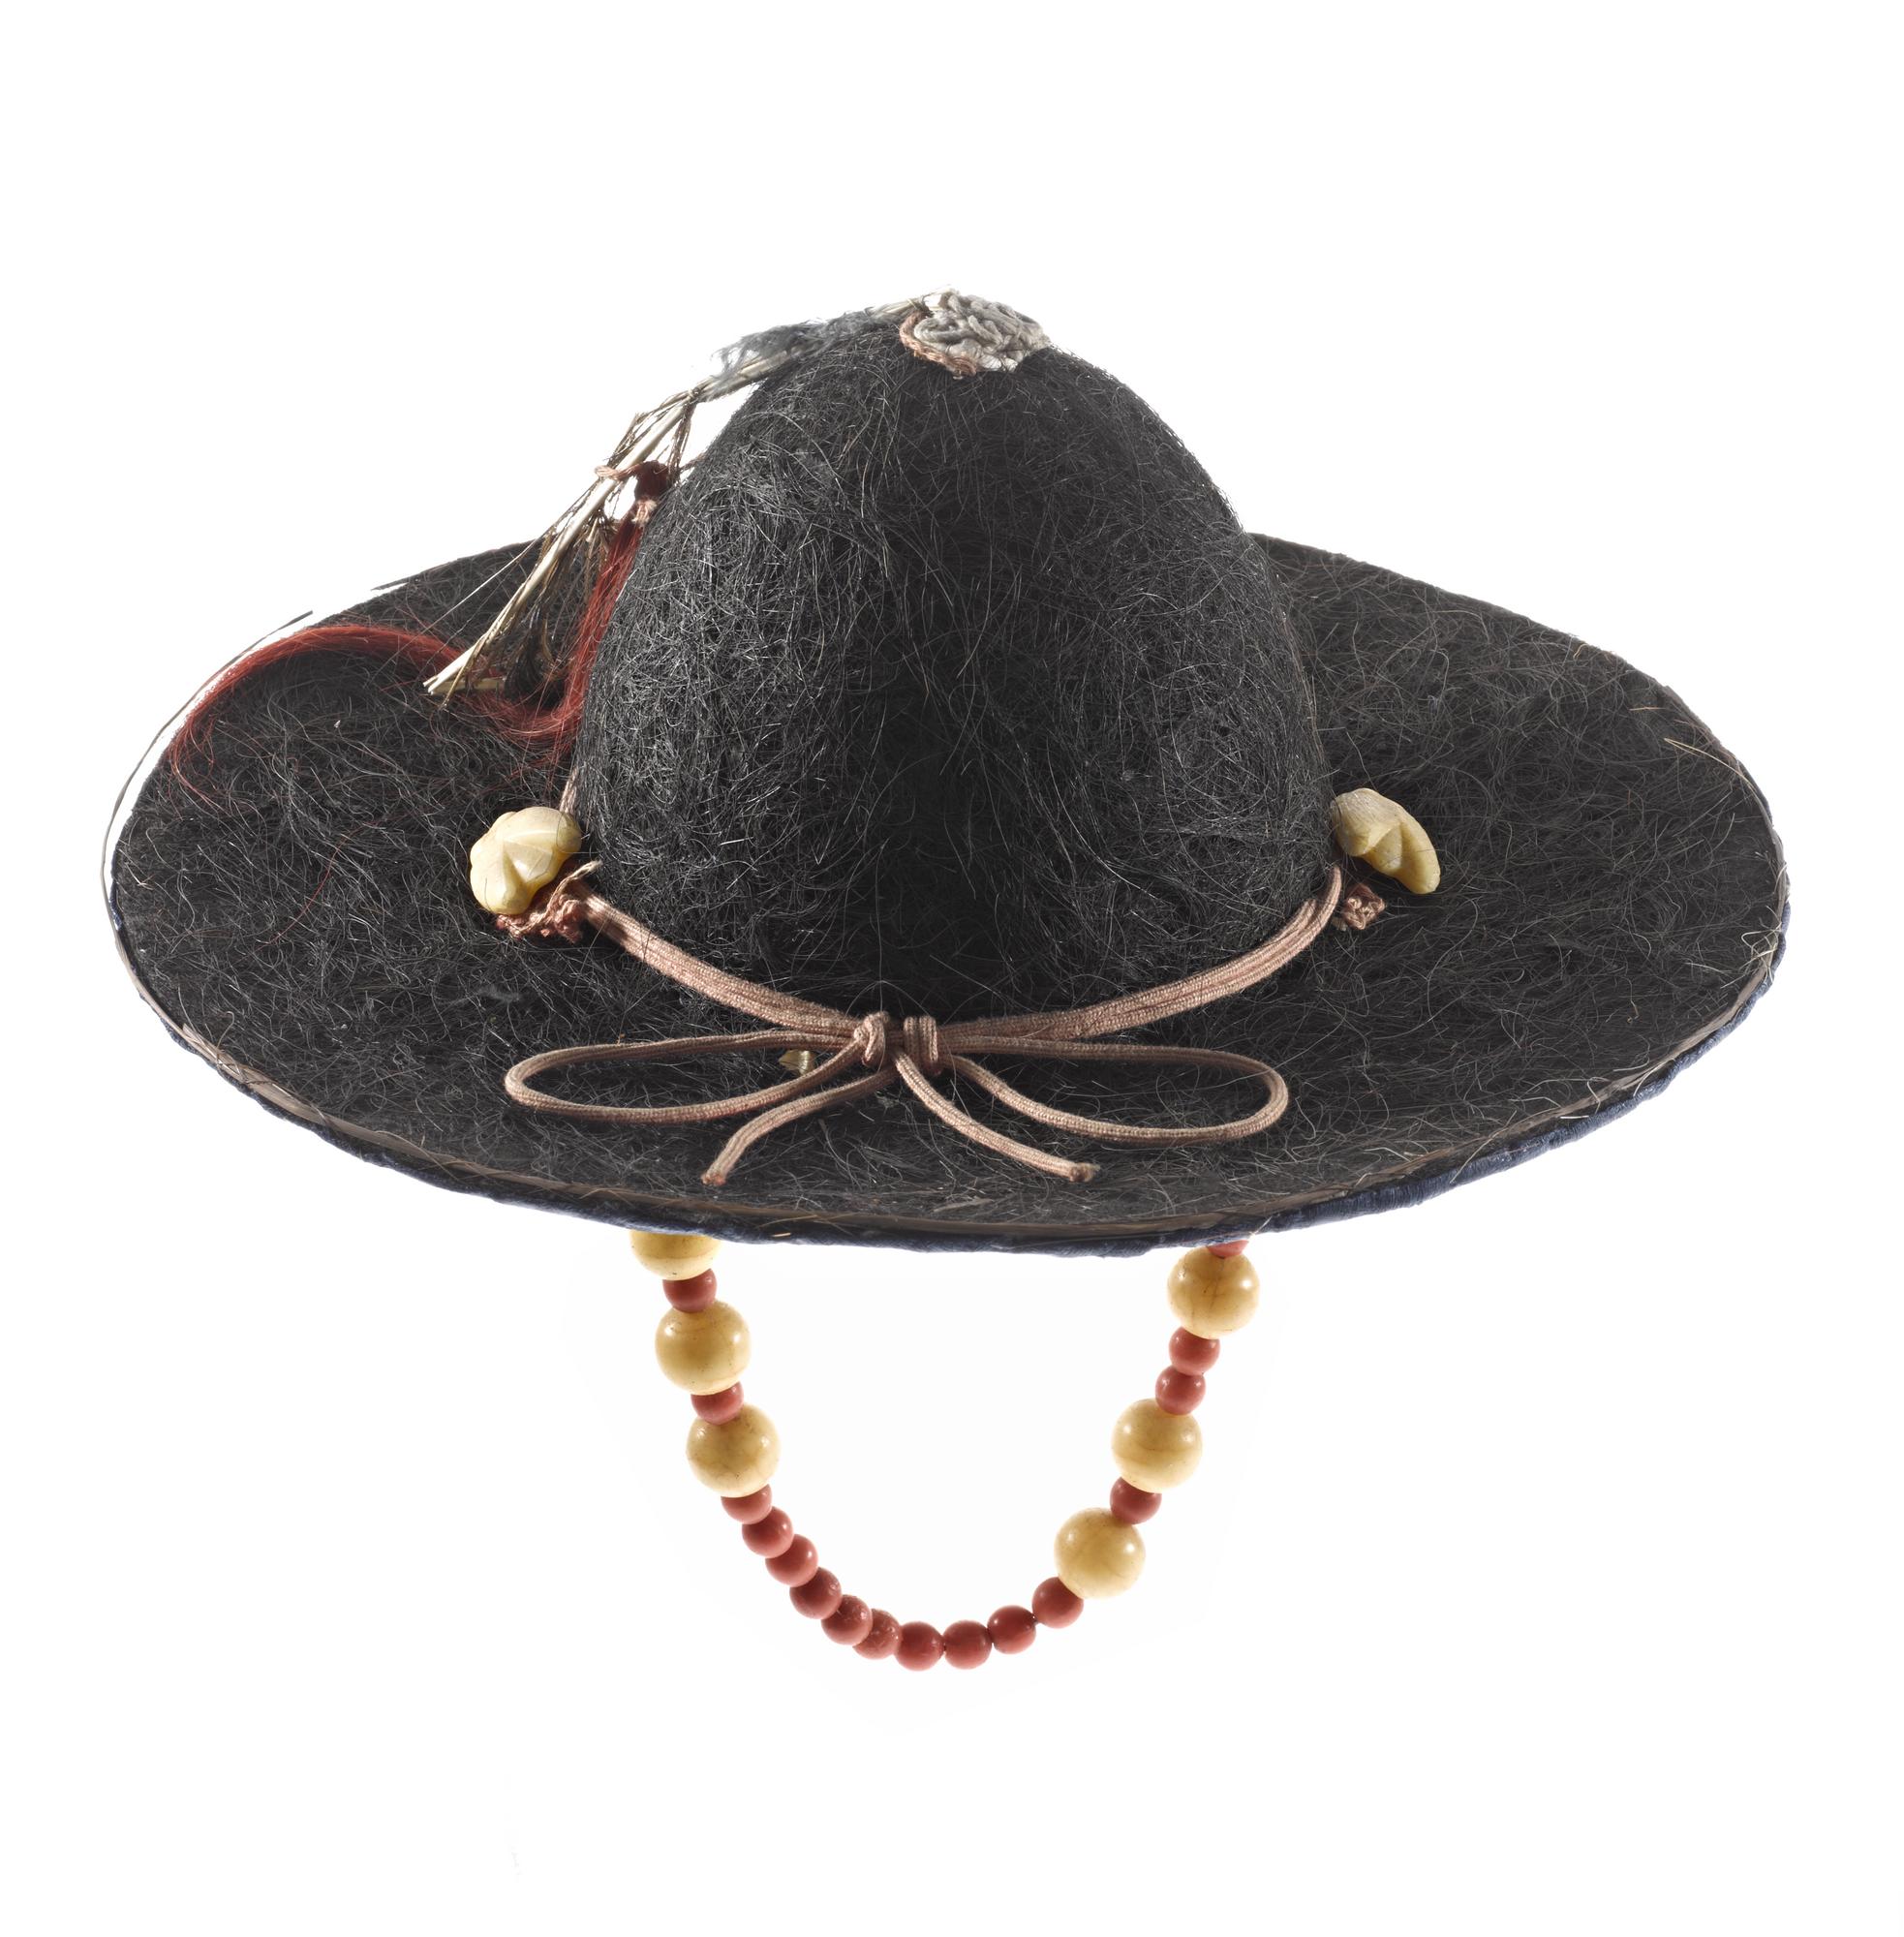 Royal courier's hat (jeonrip) made of cow-hair with a chin-band of beads, a peacock feather and red cord: Korea.